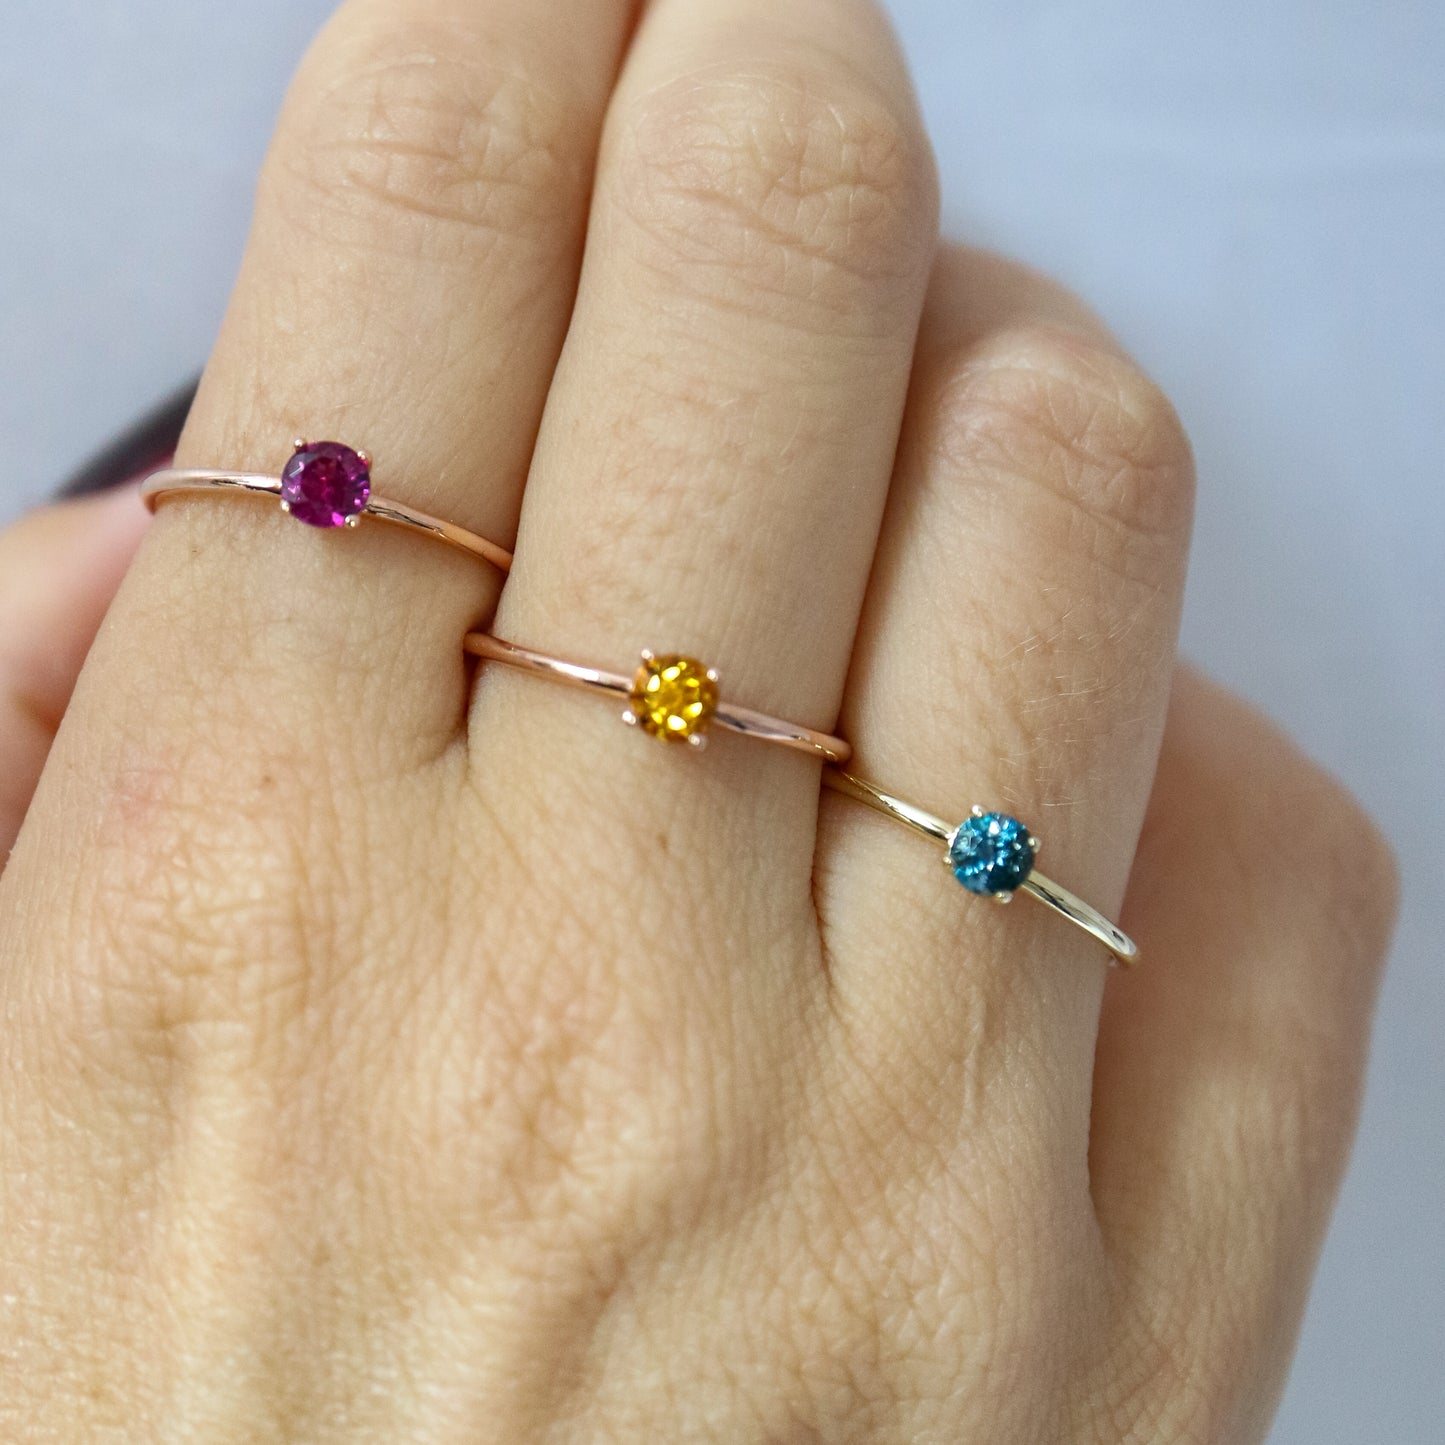 9kt gold stacking rings